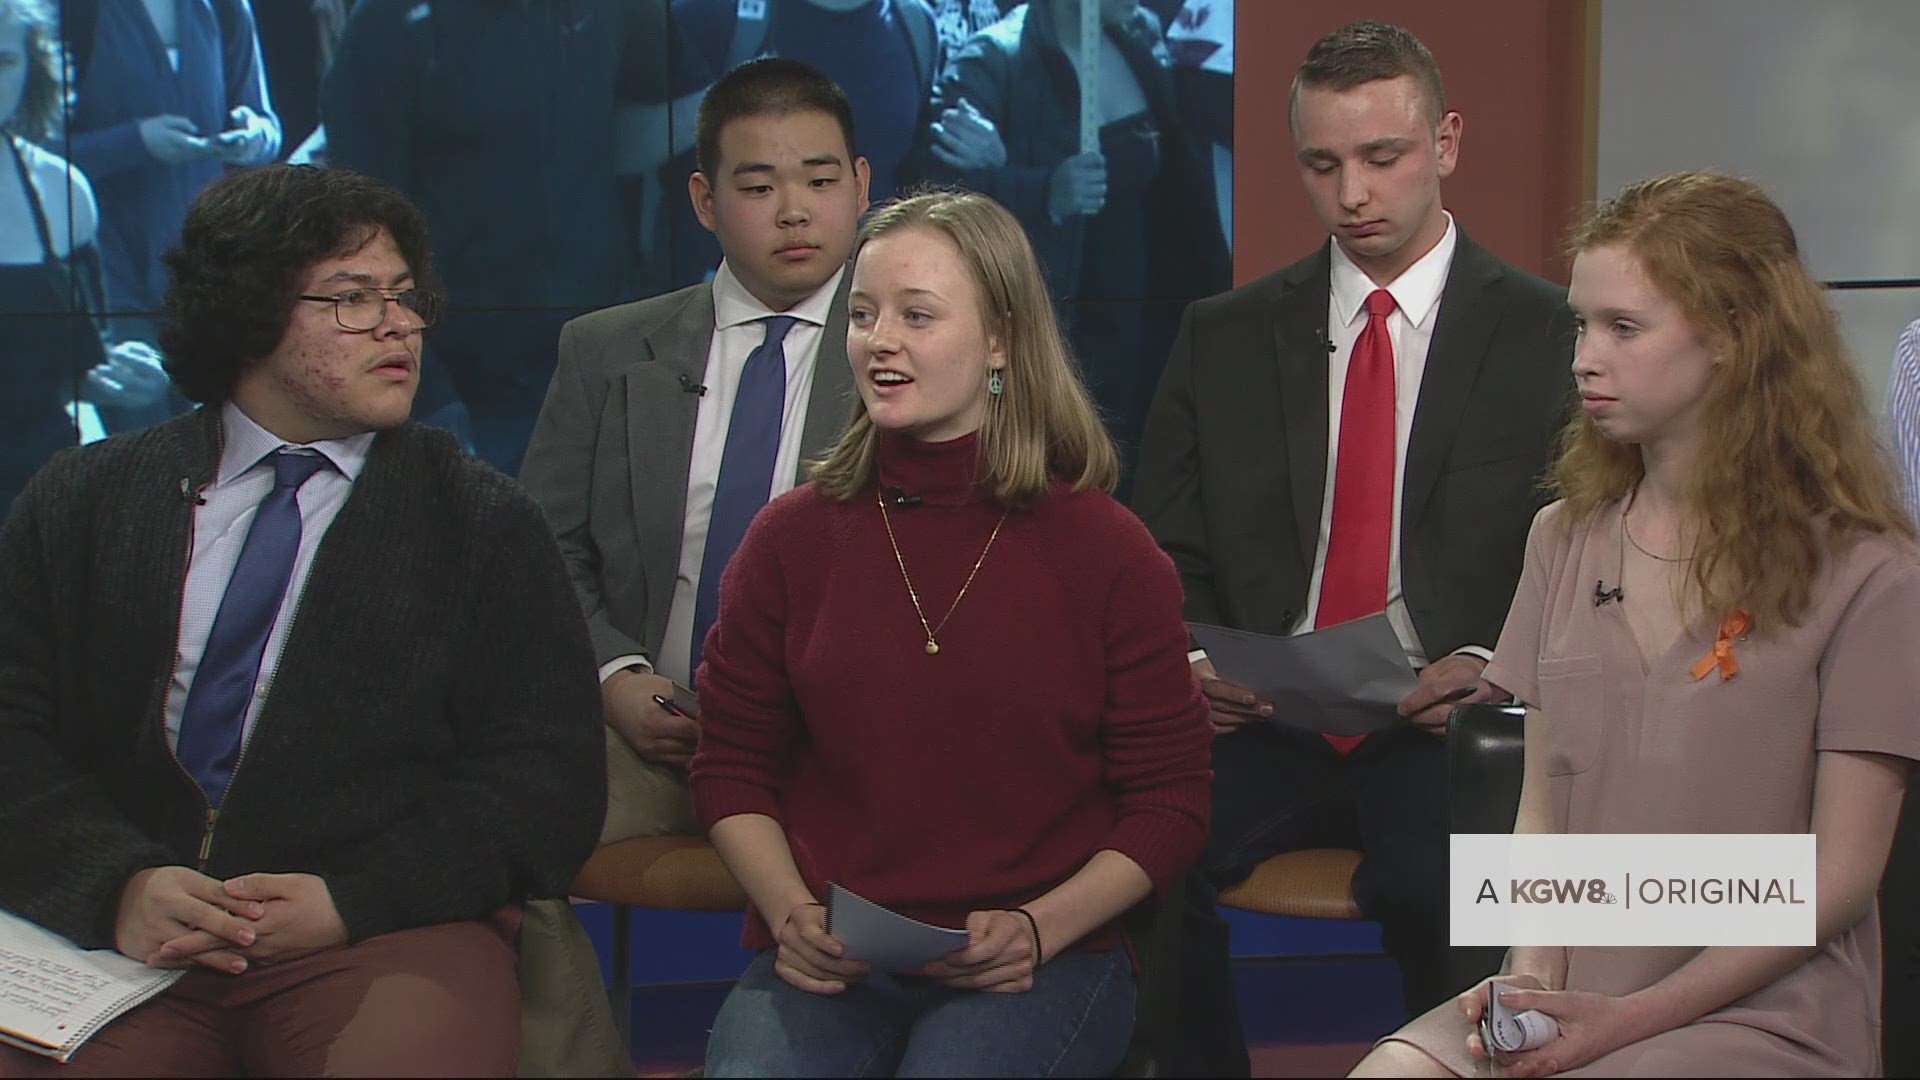 A panel of 8 students discuss whether more security would make them feel safer at schools. This is part of KGW's special Students Demand Action.